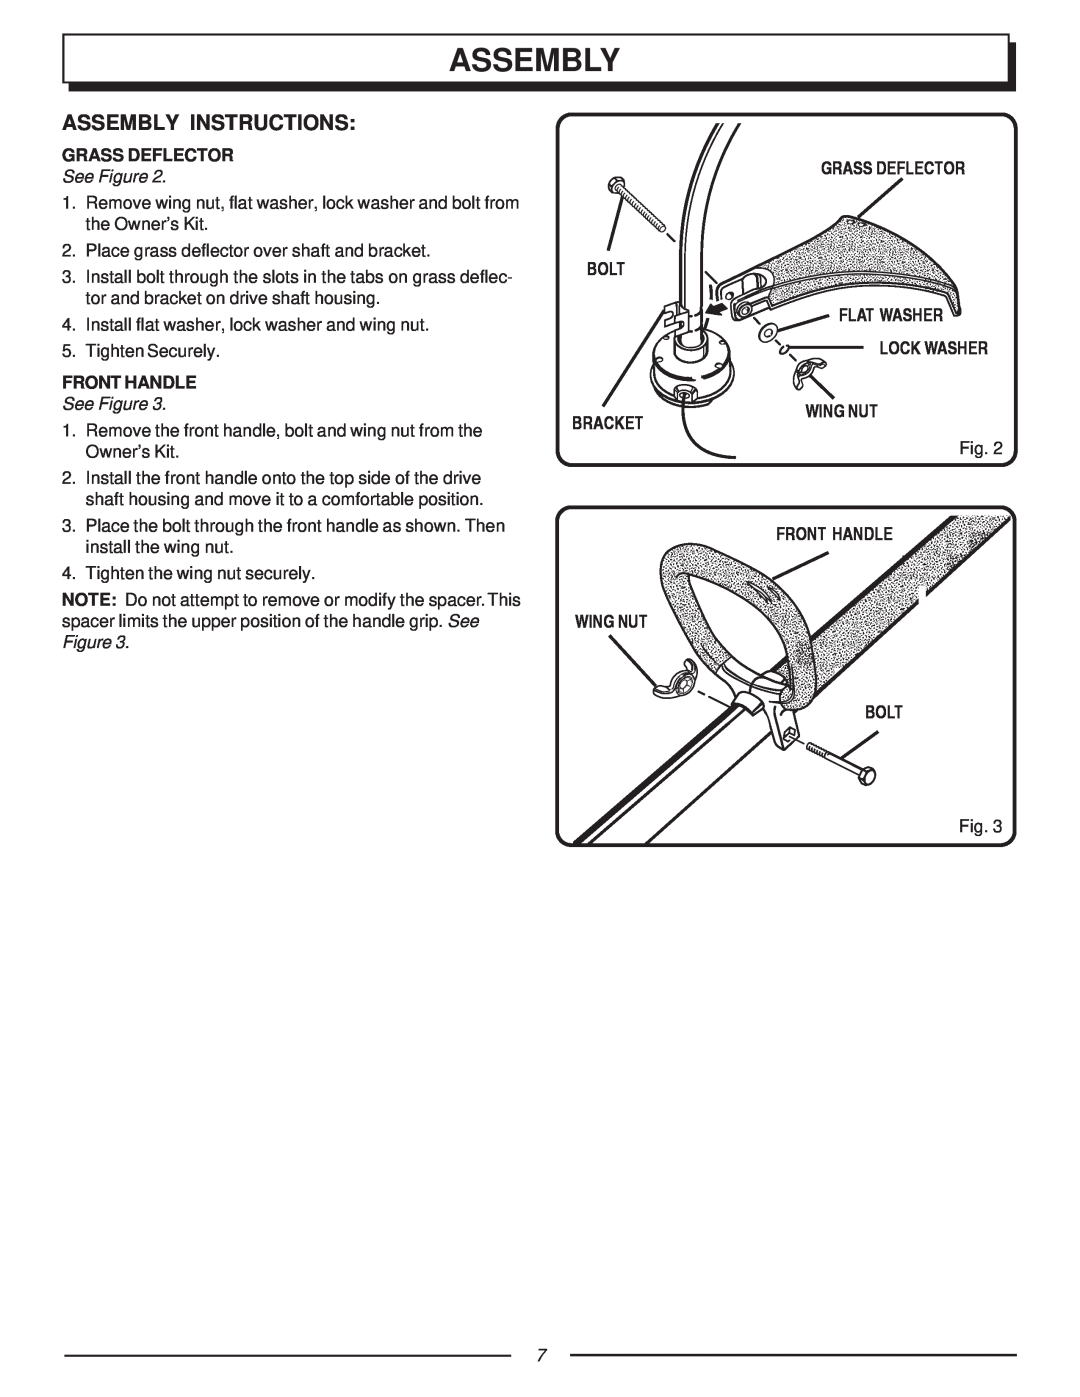 Homelite UT70121, F2020 manual Assembly Instructions, Grass Deflector, See Figure, Front Handle Bolt 